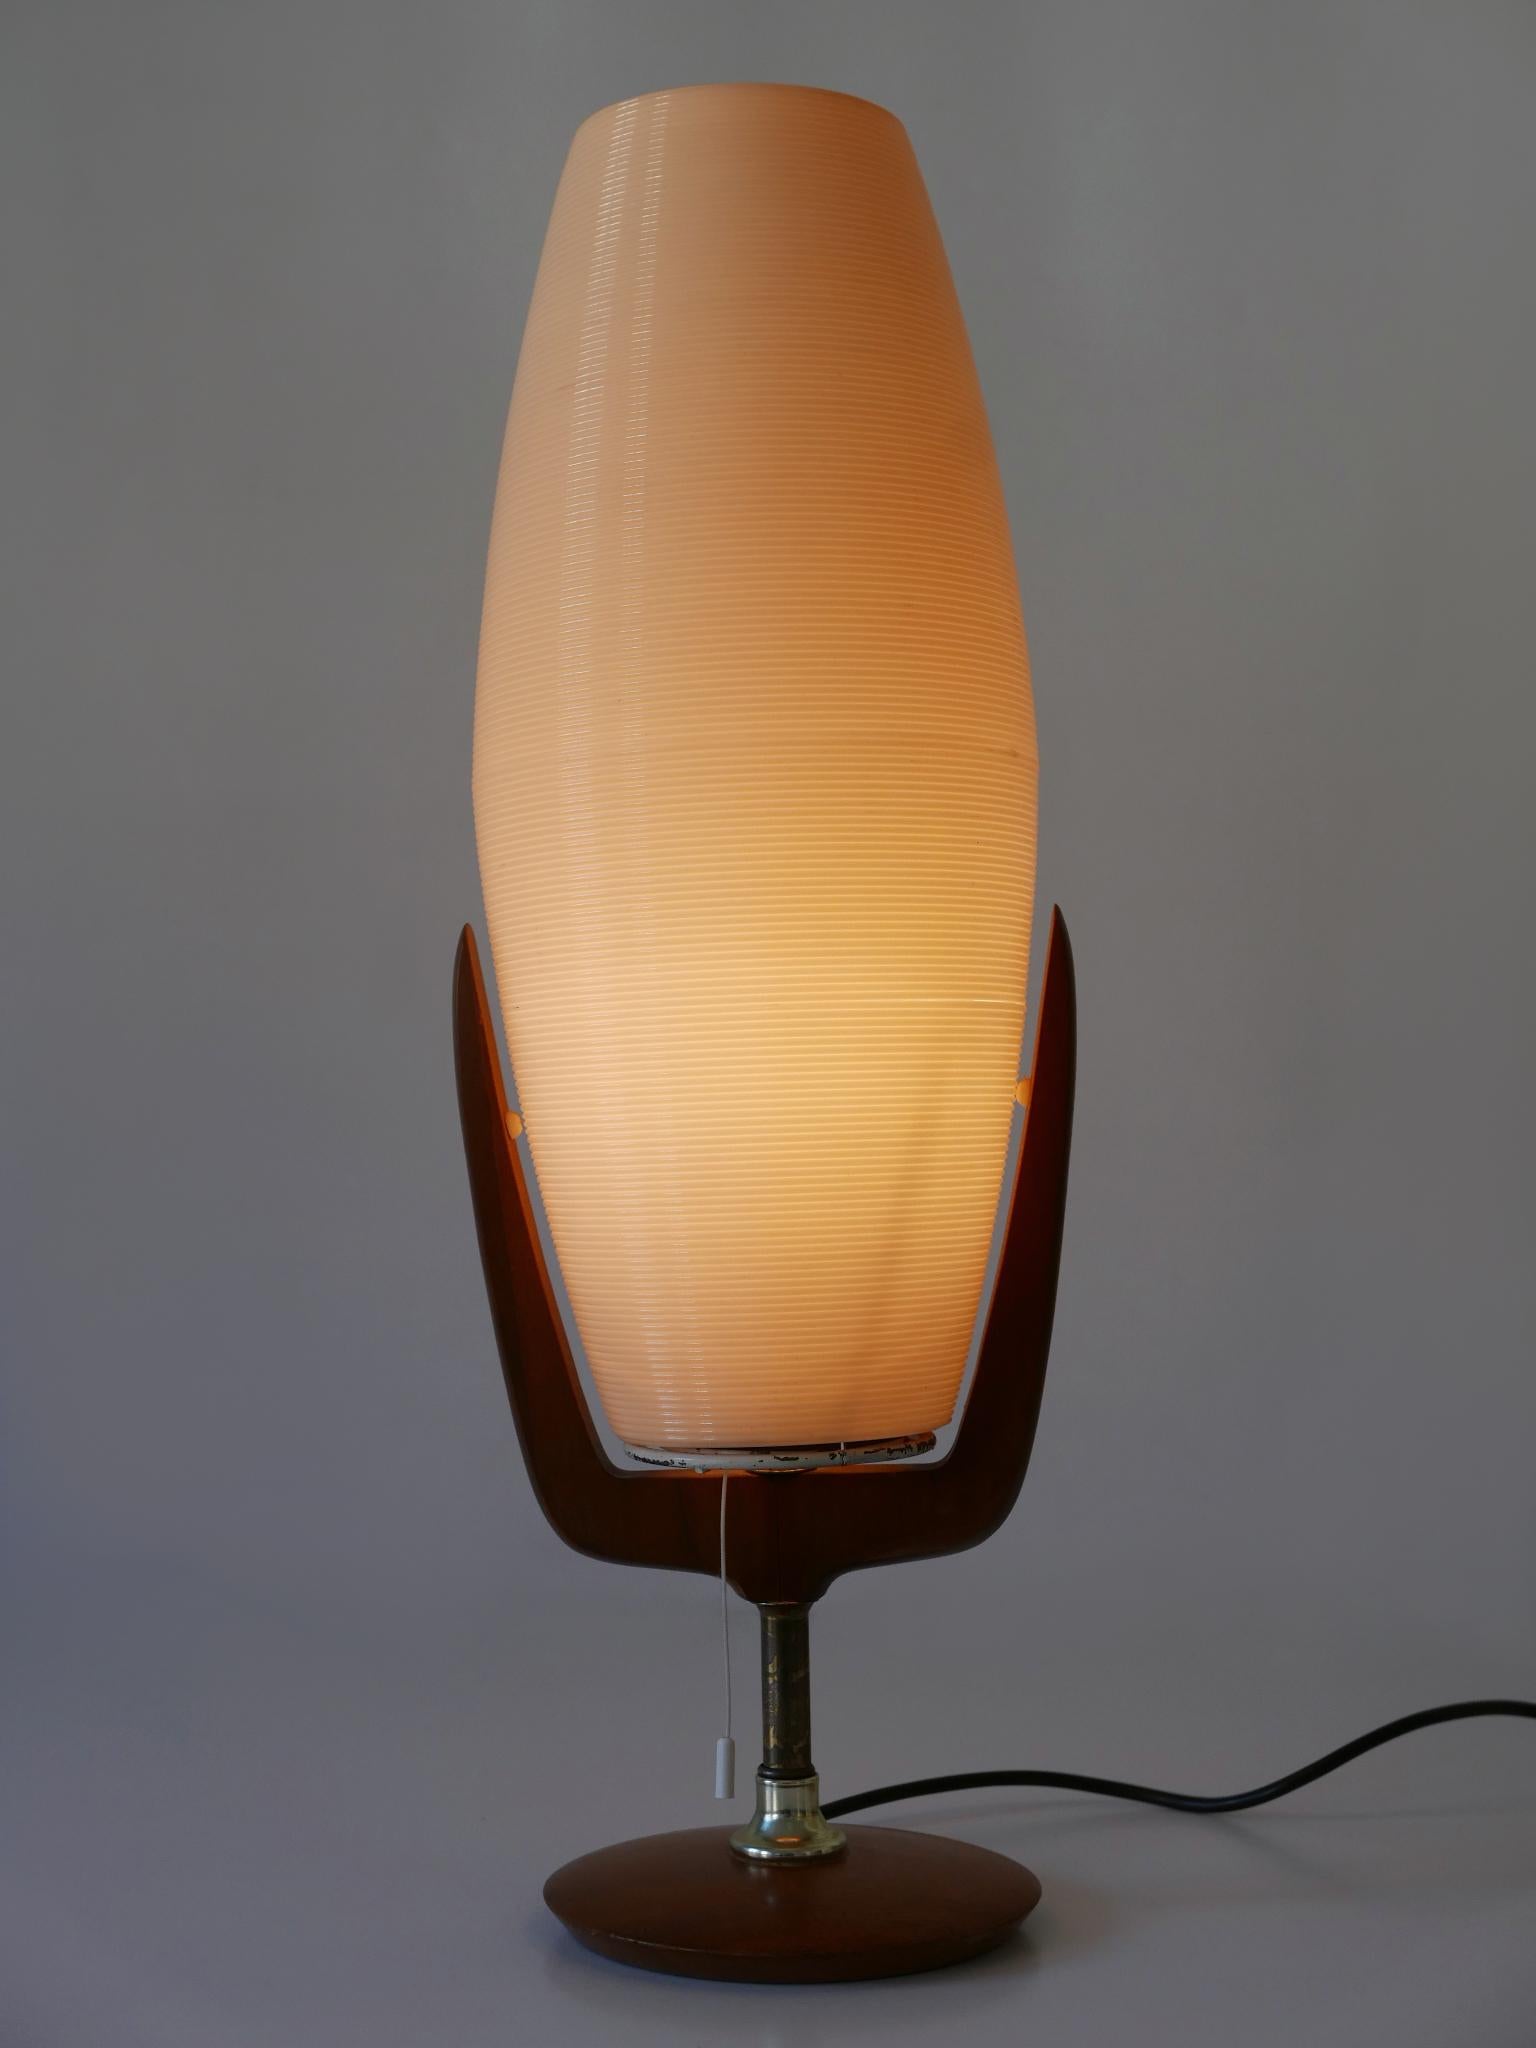 Large, rare and highly decorative Mid-Century Modern table lamp. Designed and manufactured by Yasha Heifetz for Heifetz Manufacturing, USA, 1950s.

Executed in plastic, brass and walnut wood, the lamp comes with 1 x E27 / E26 Edison screw fit bulb